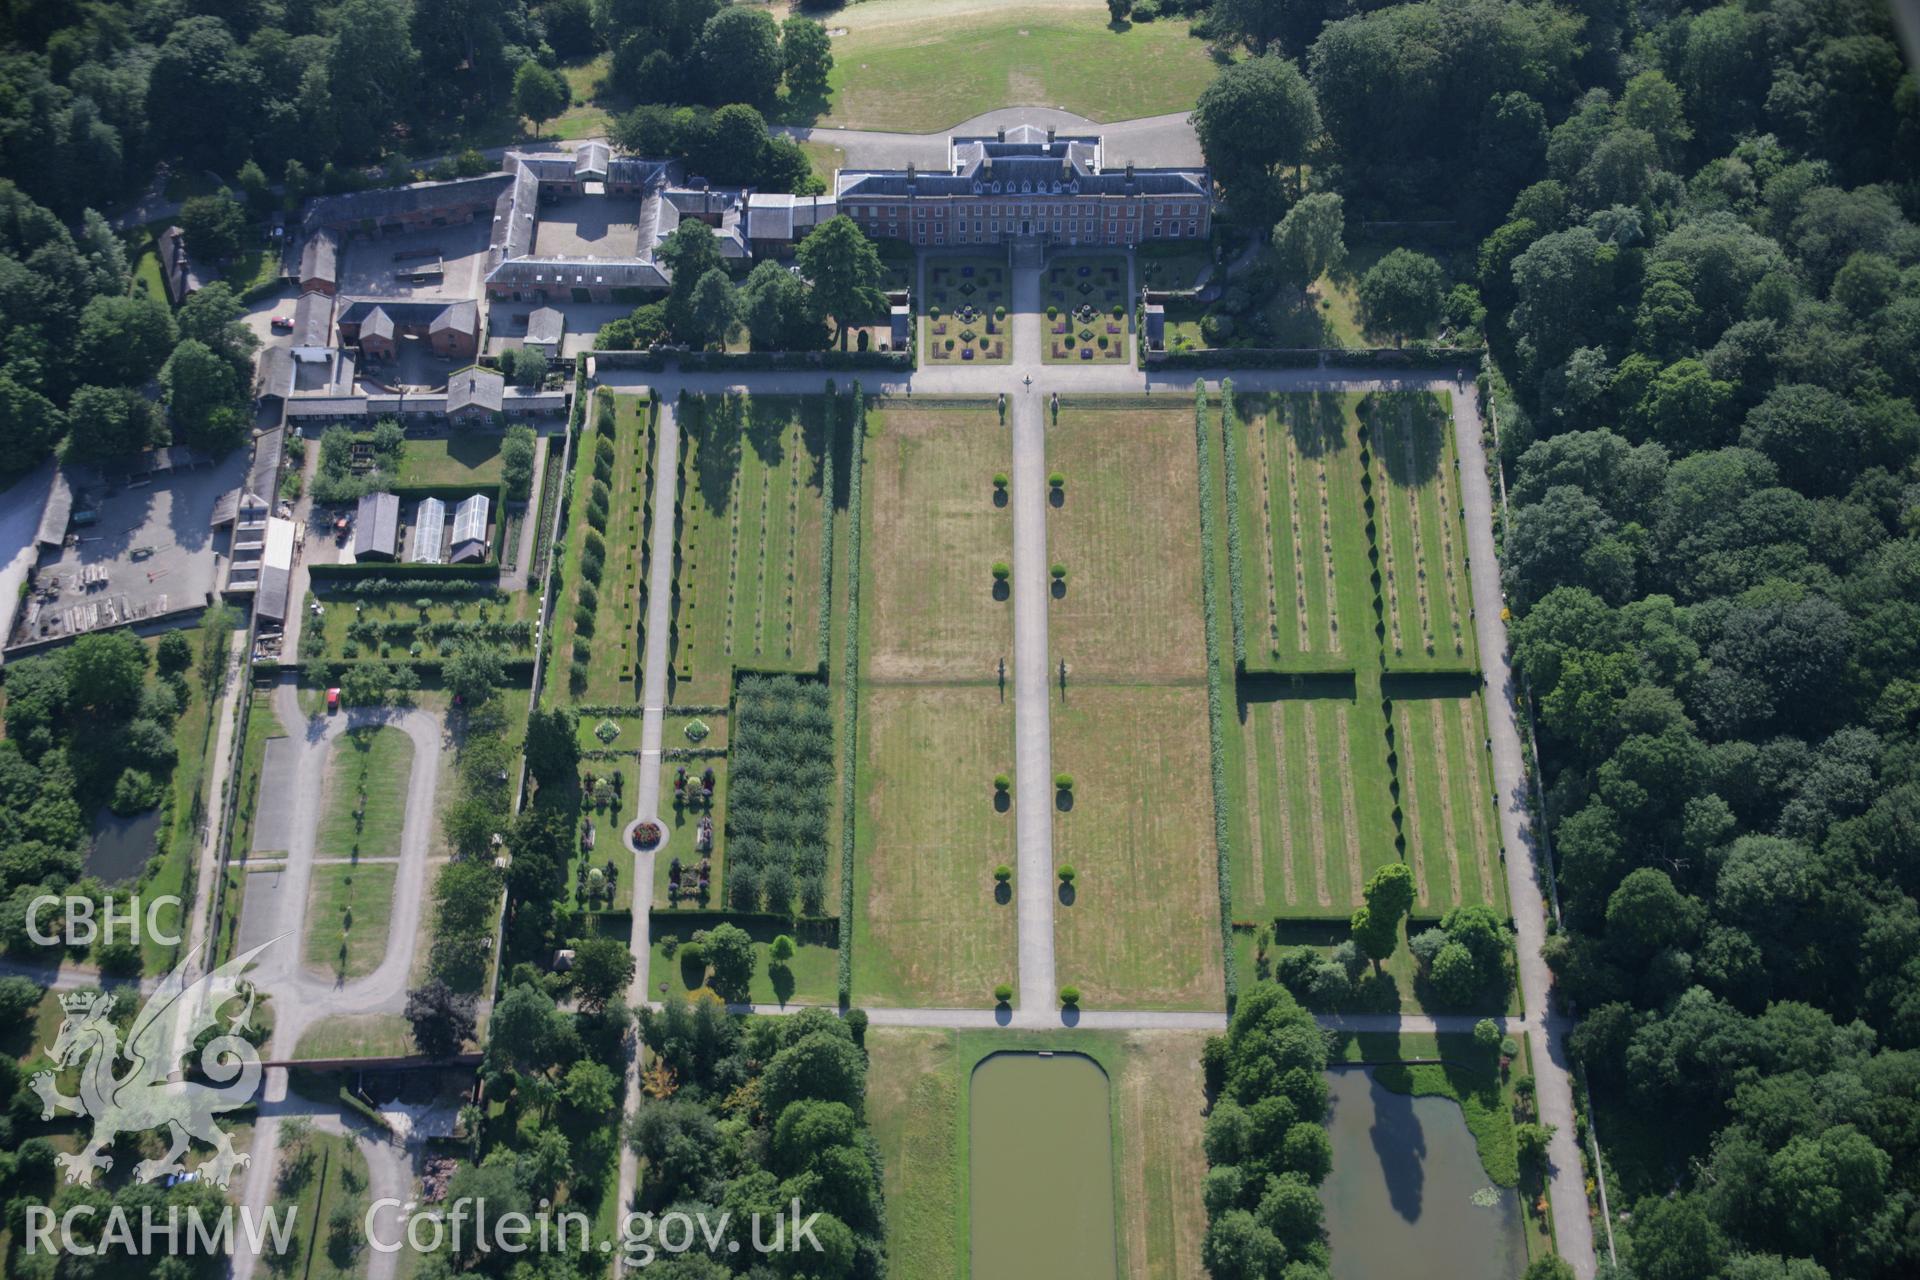 RCAHMW colour oblique aerial photograph of Erddig Park Garden, Wrexham. Taken on 17 July 2006 by Toby Driver.